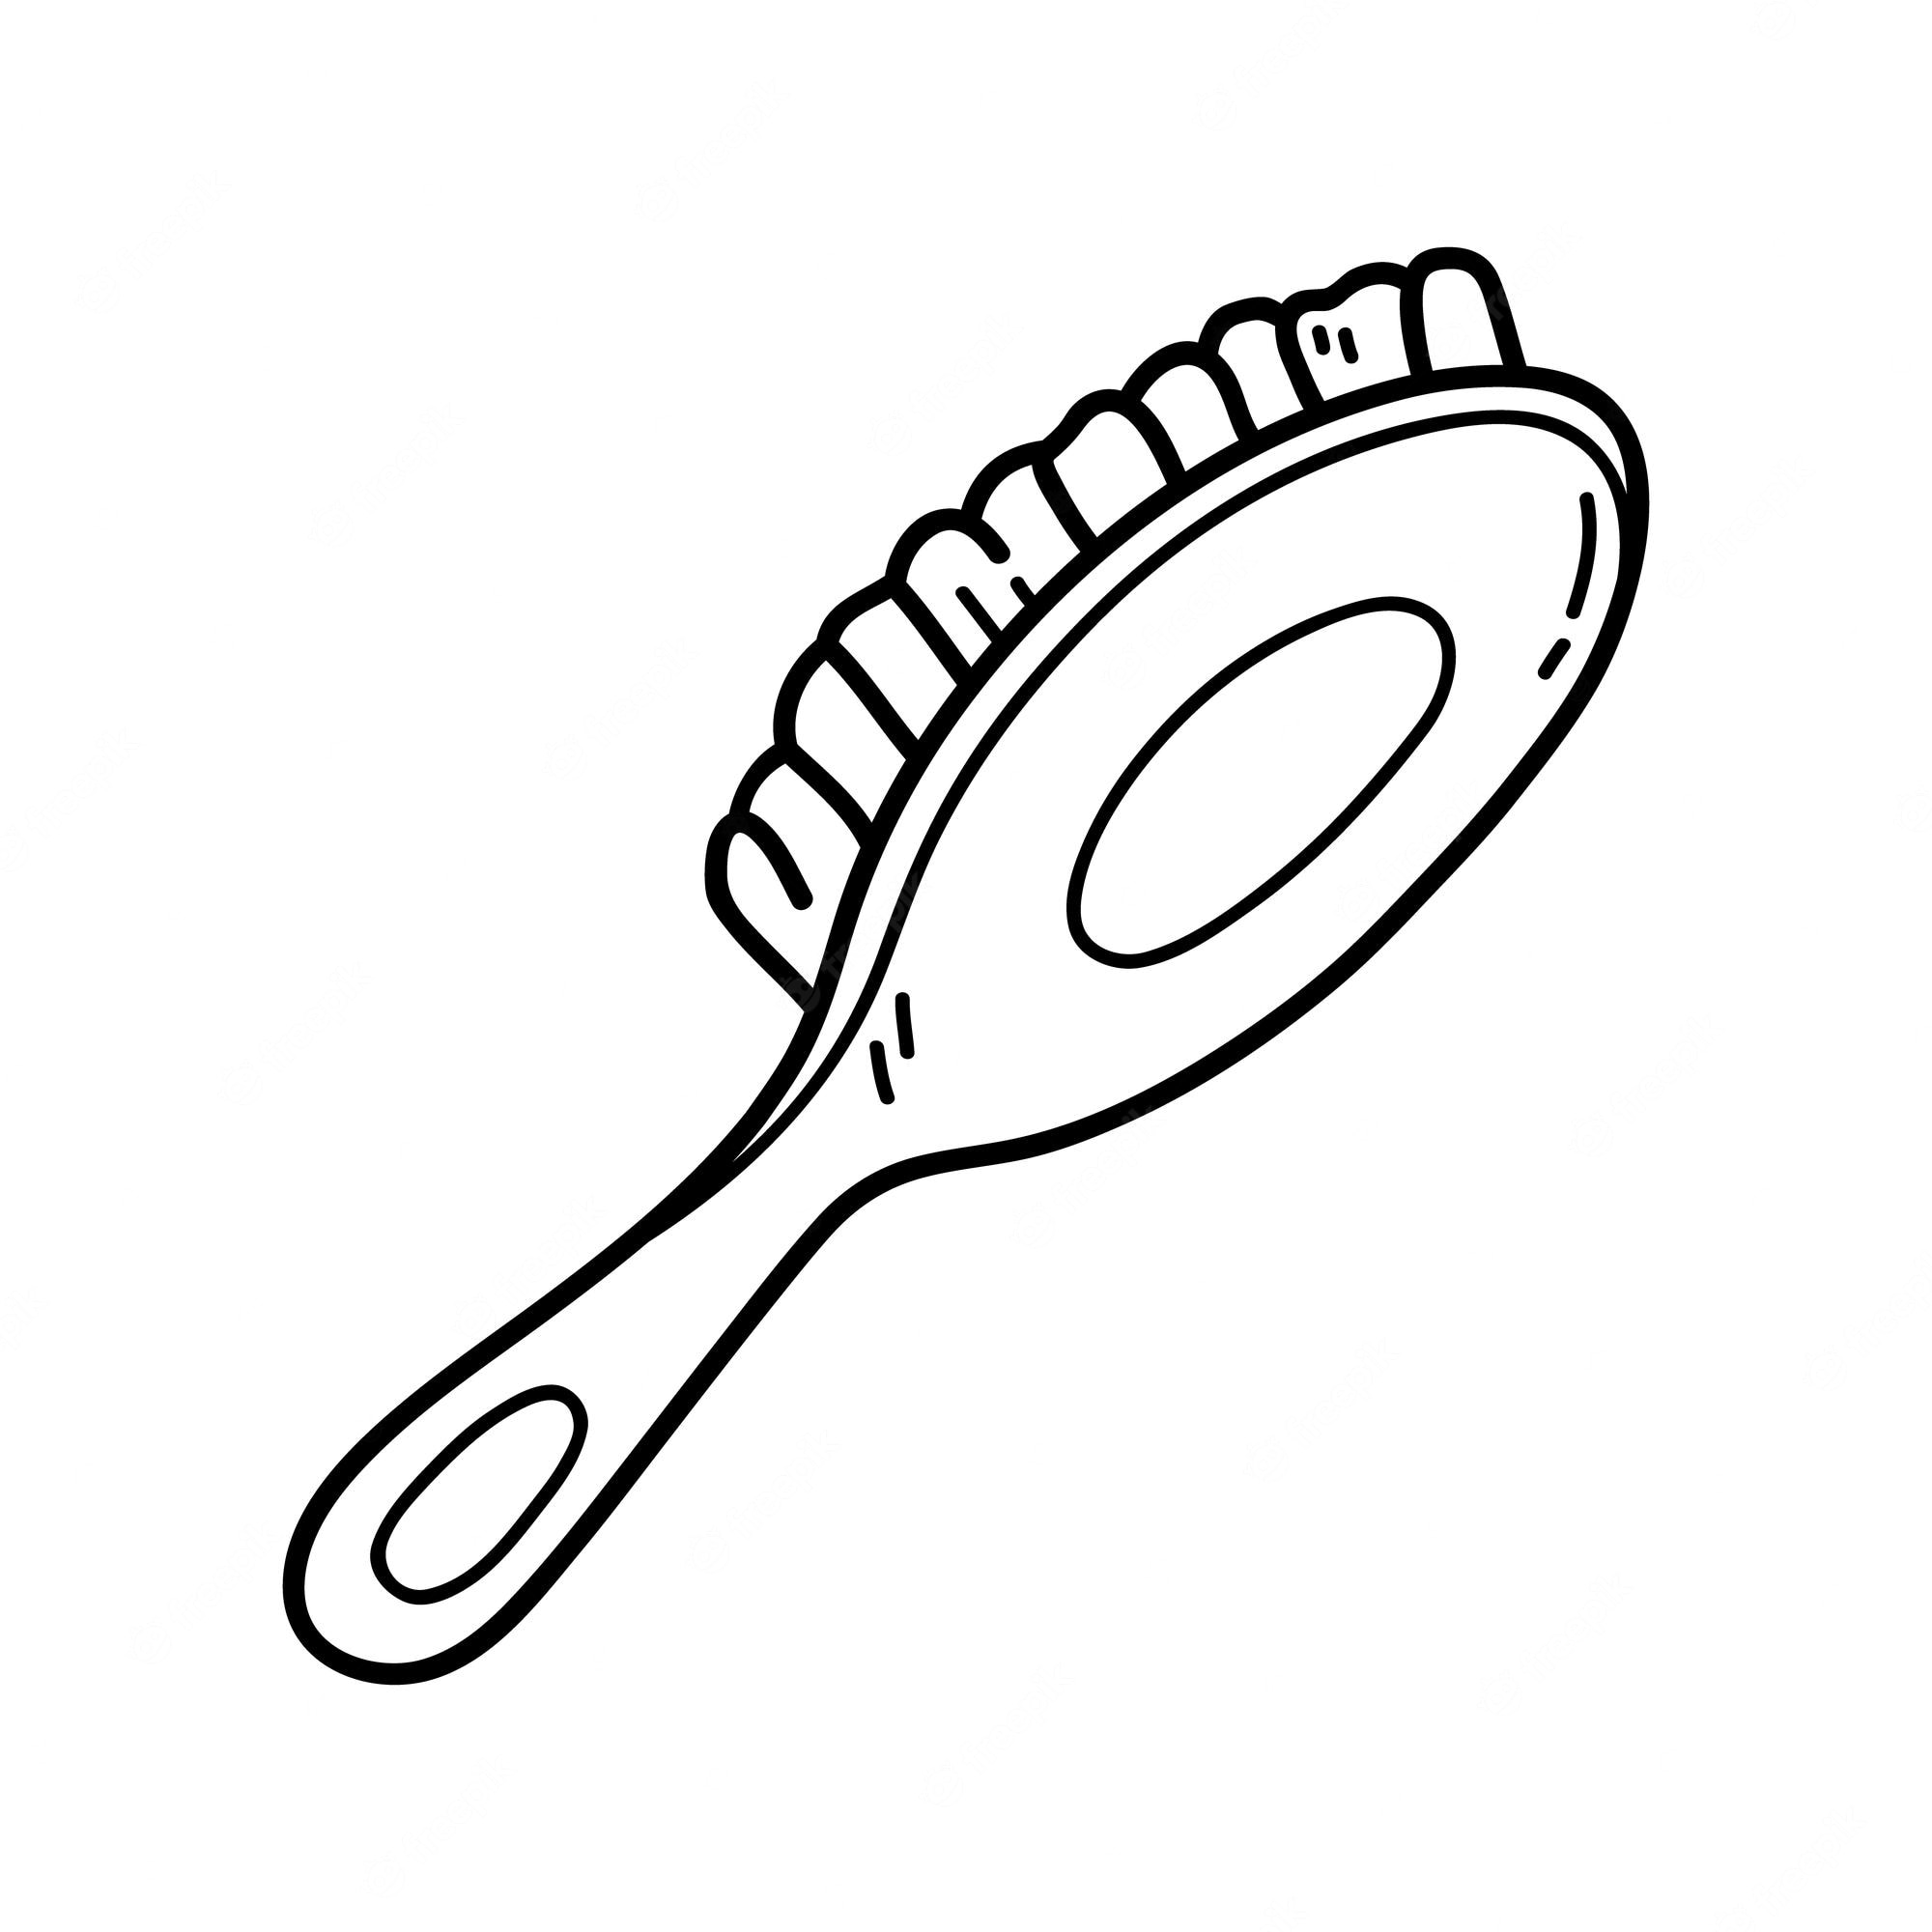 Premium Vector | Coloring page with doodle hair brush